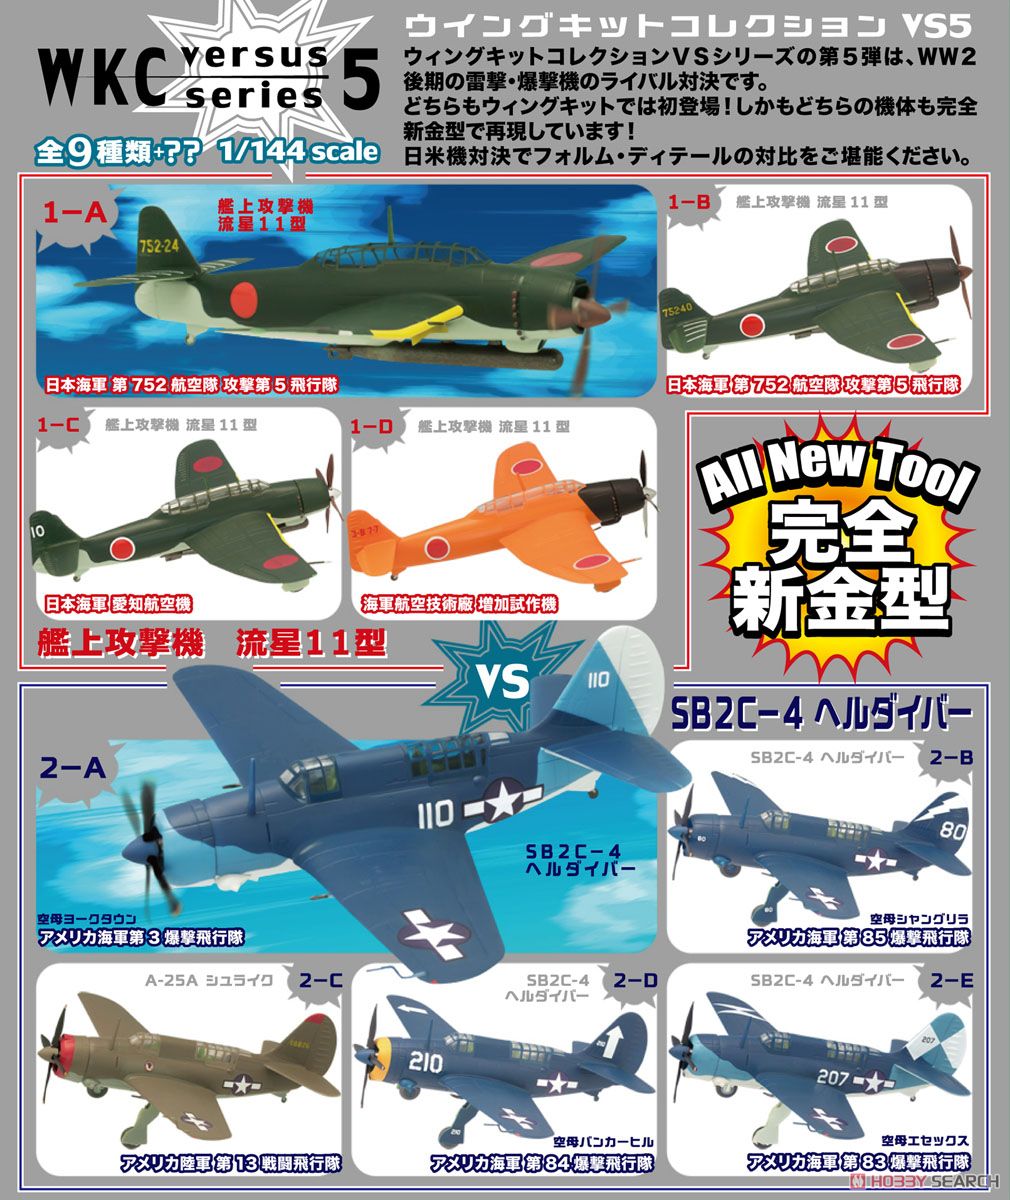 F-toys 1/144 WKC Wing Kit vs 1 #02A US Army Air Forces the 363th Squadron 